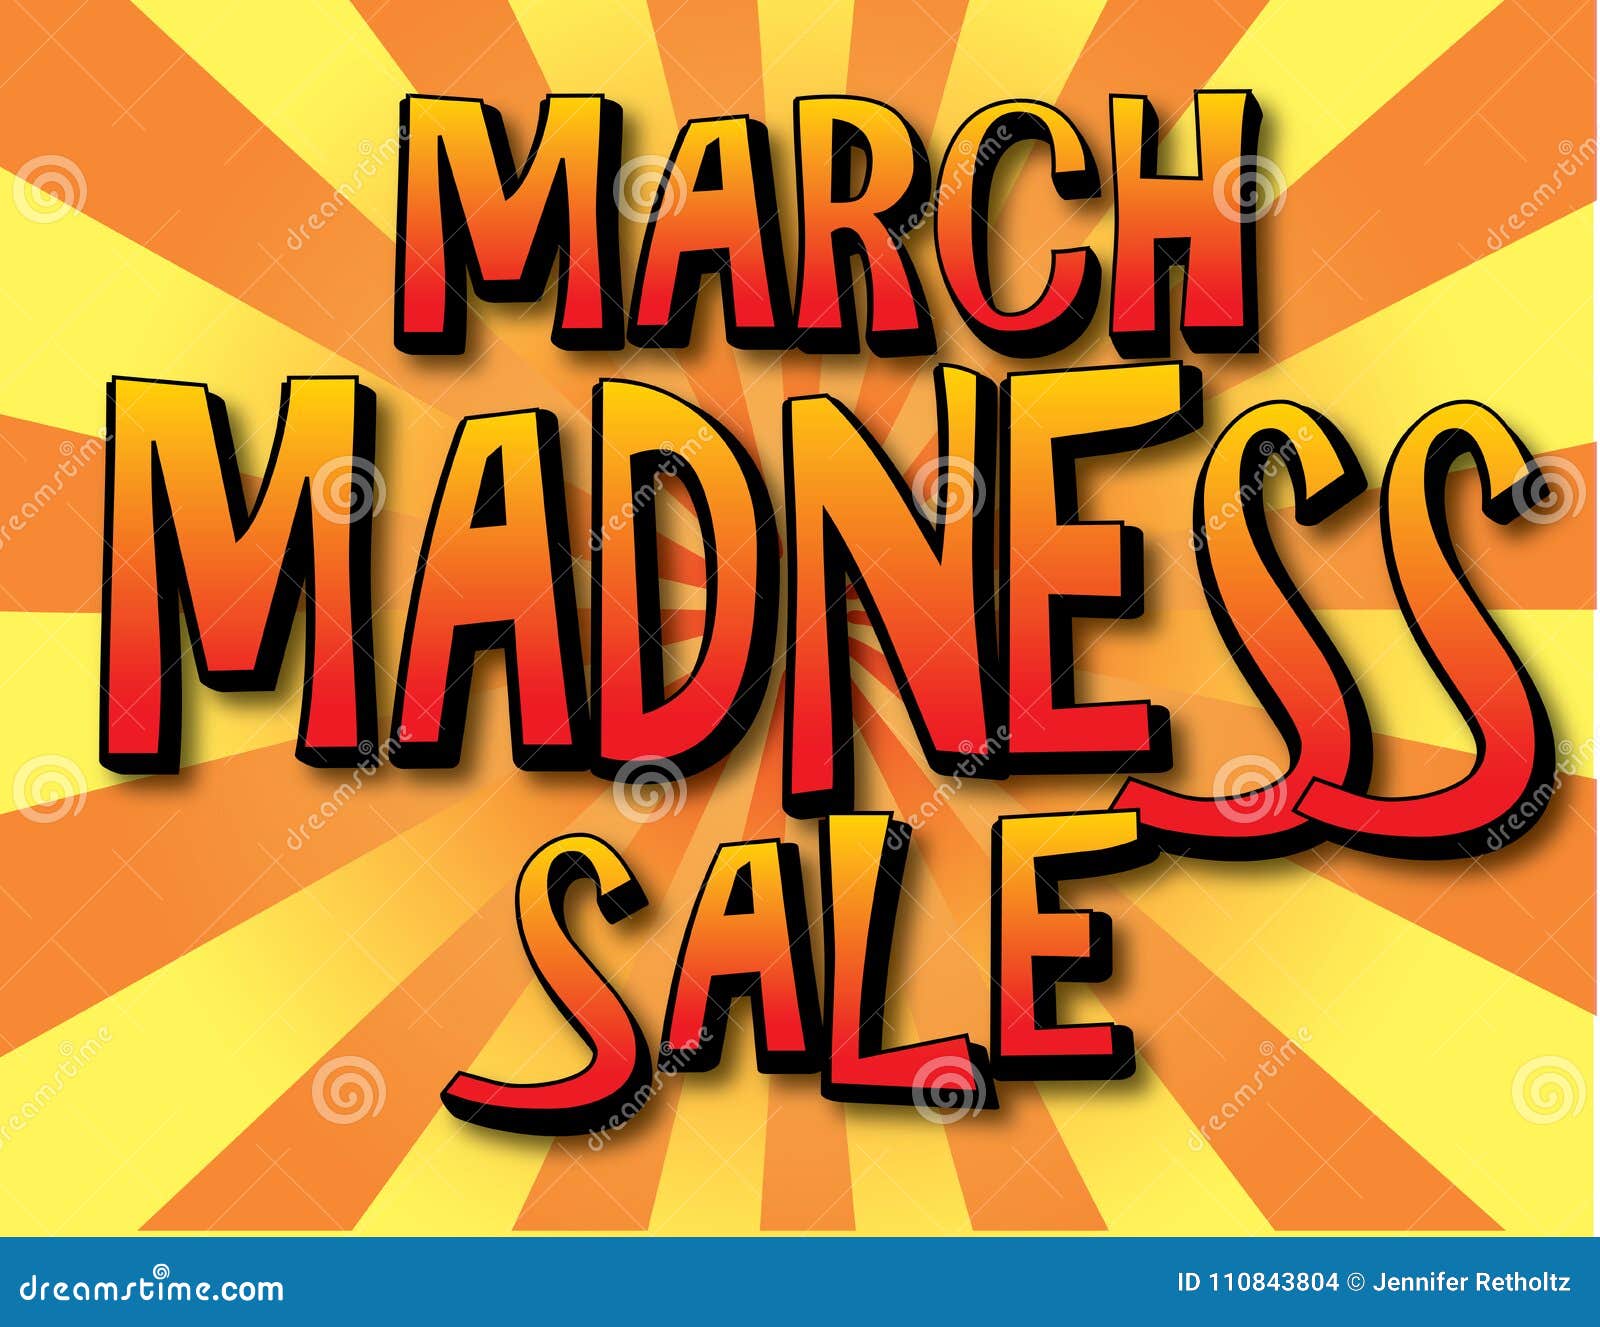 march madness sale poster banner